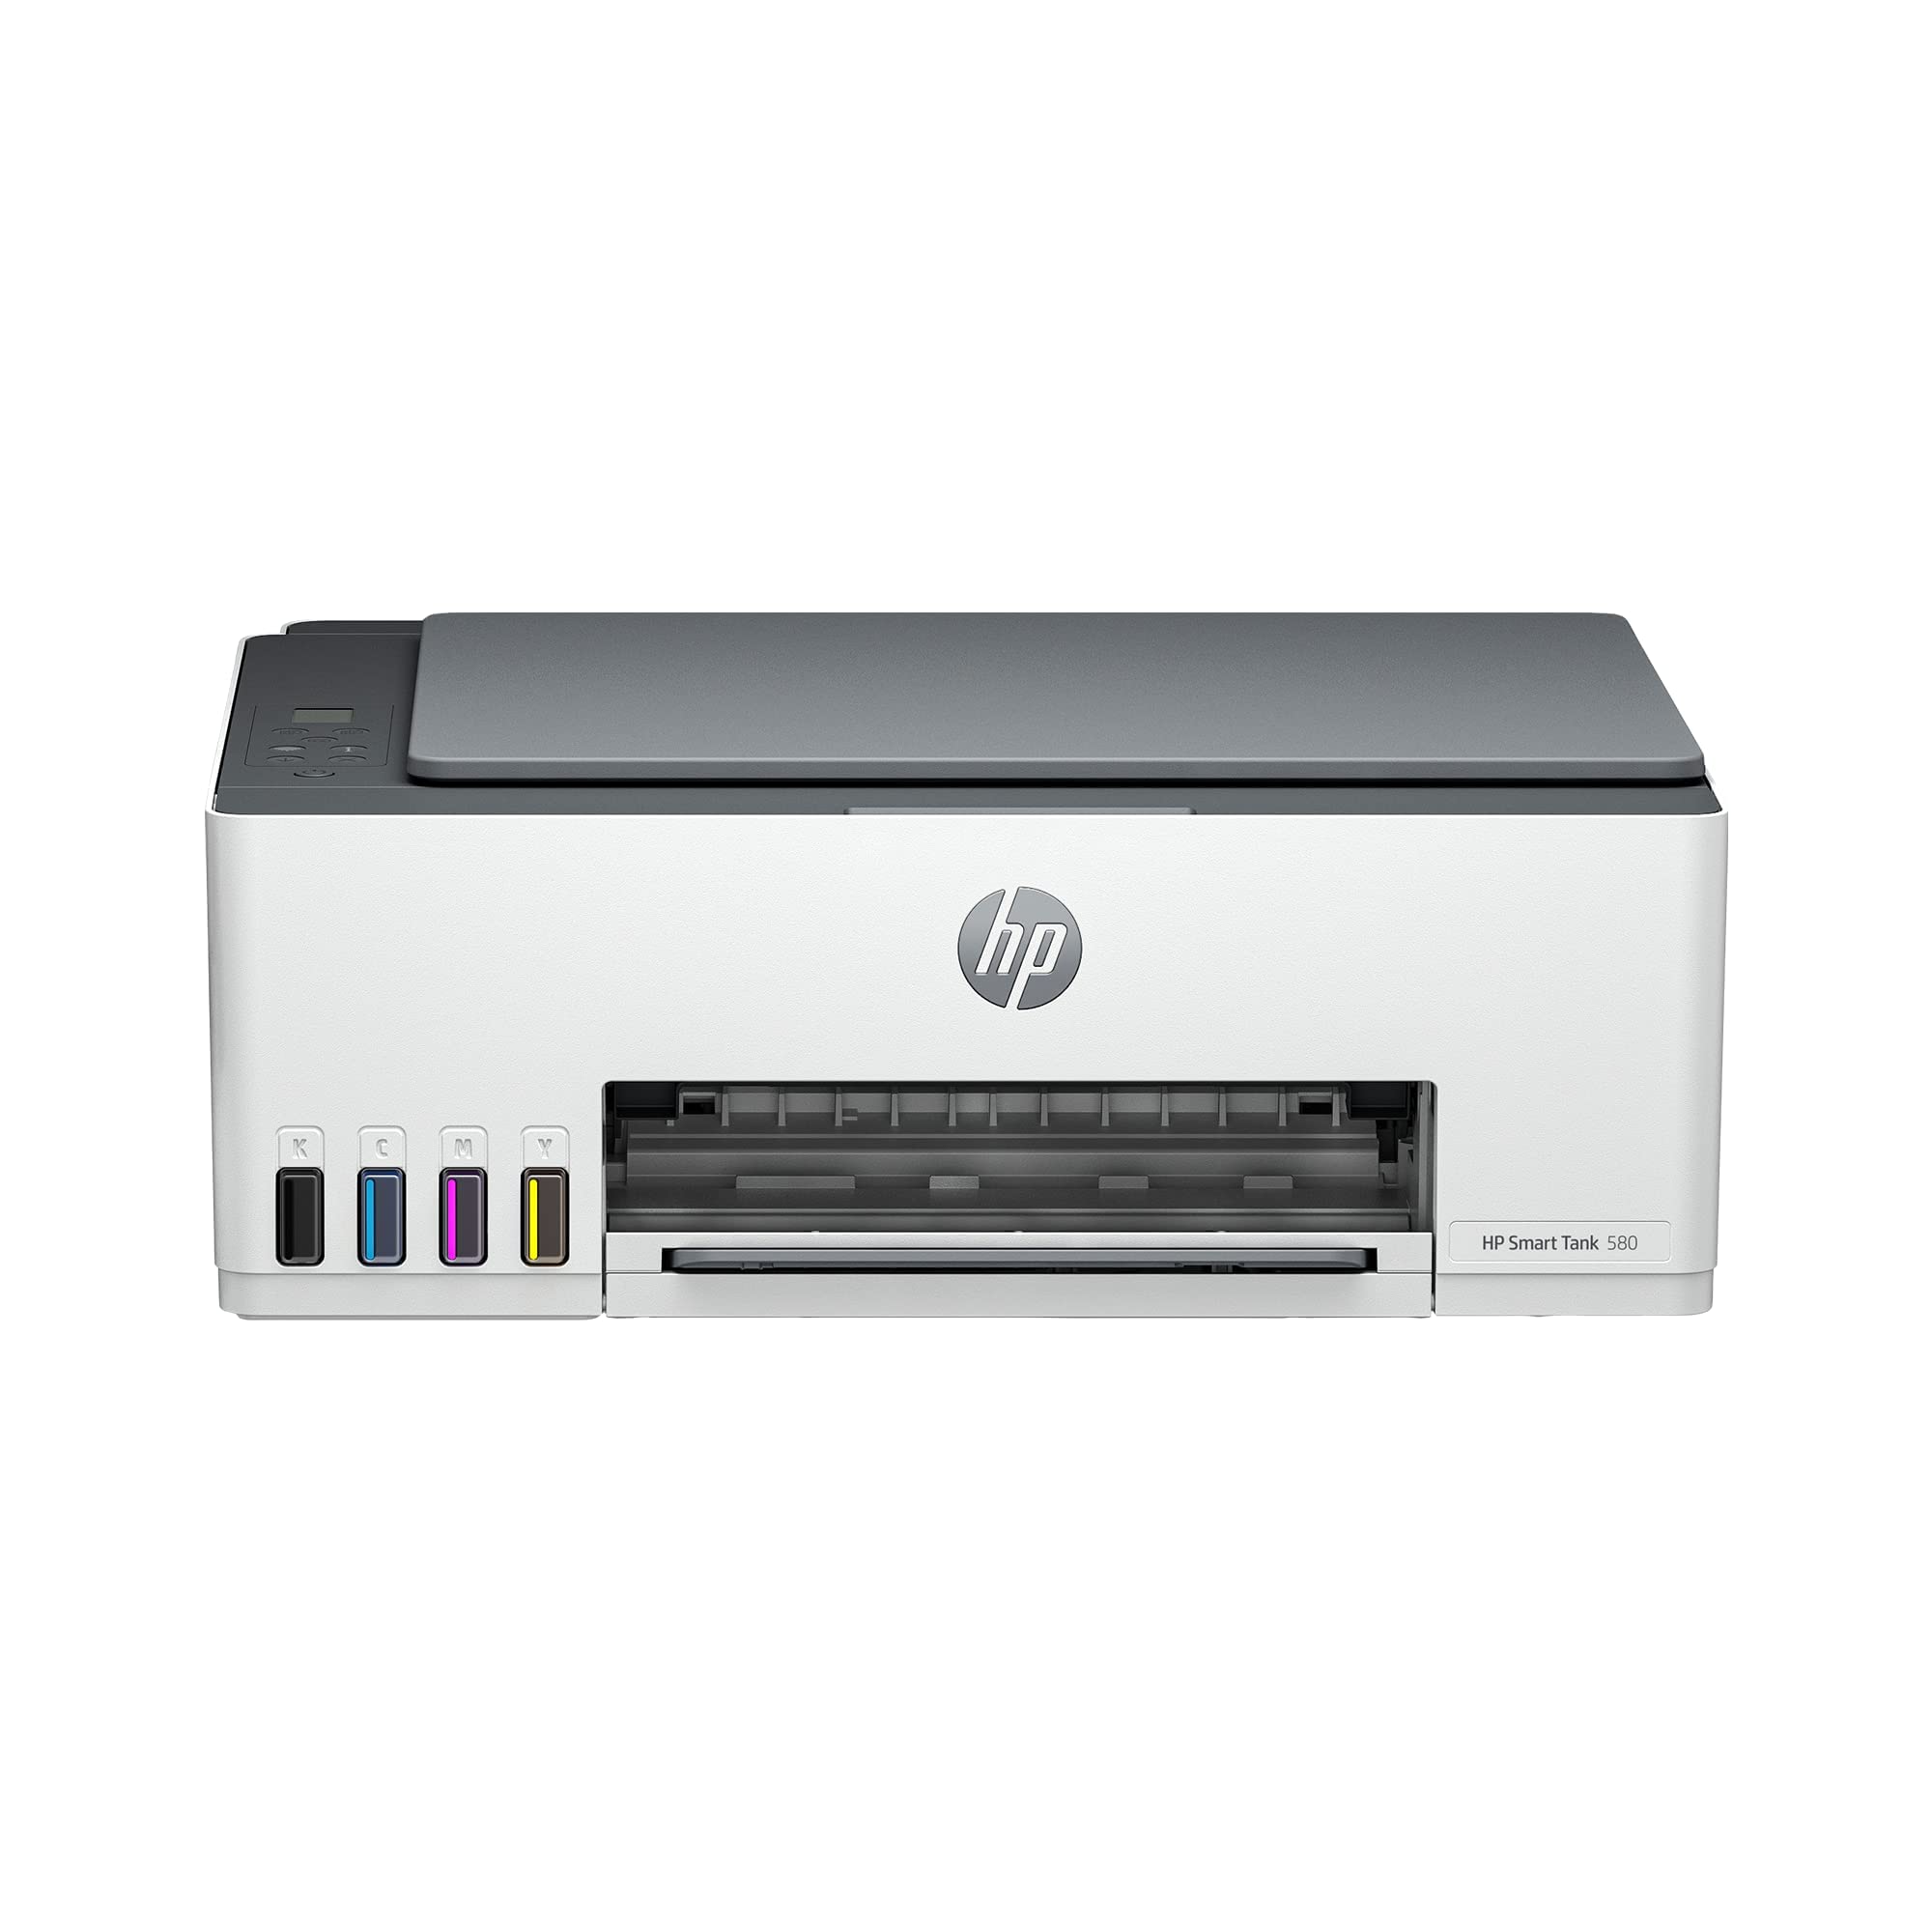 Printer HP Smart Tank 580 All in One